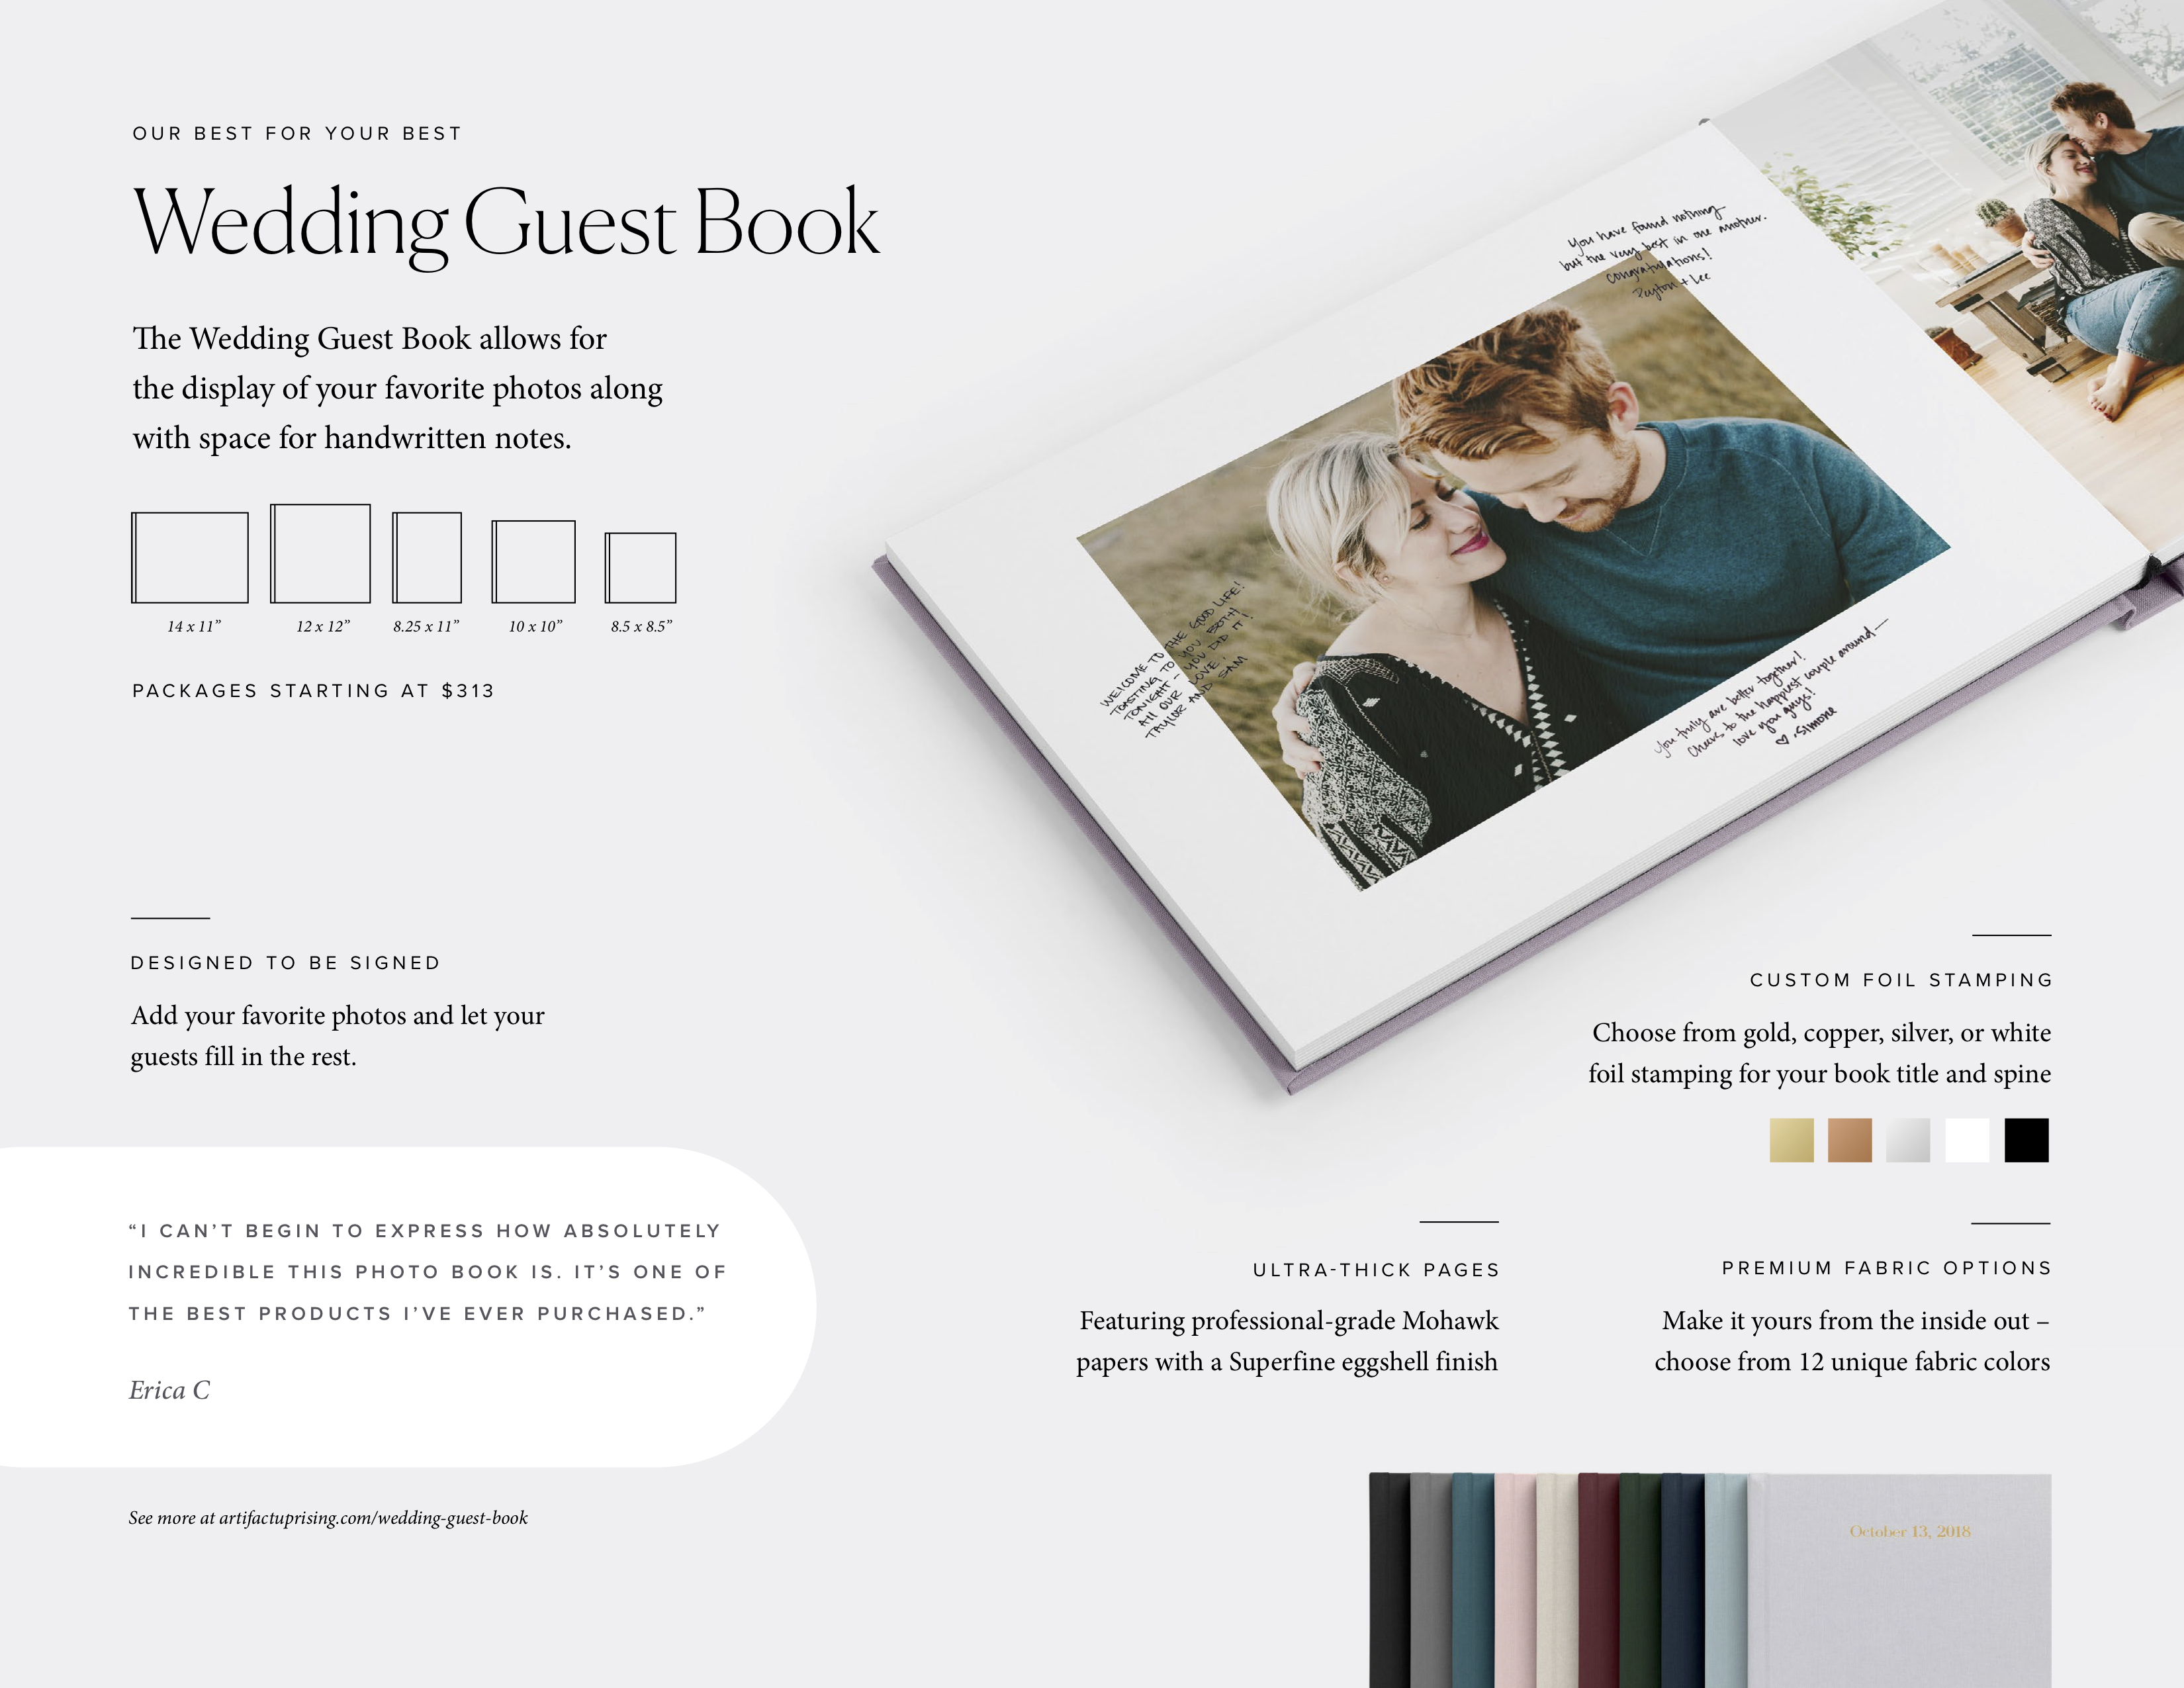 10 Extra sheets to your Guest Book